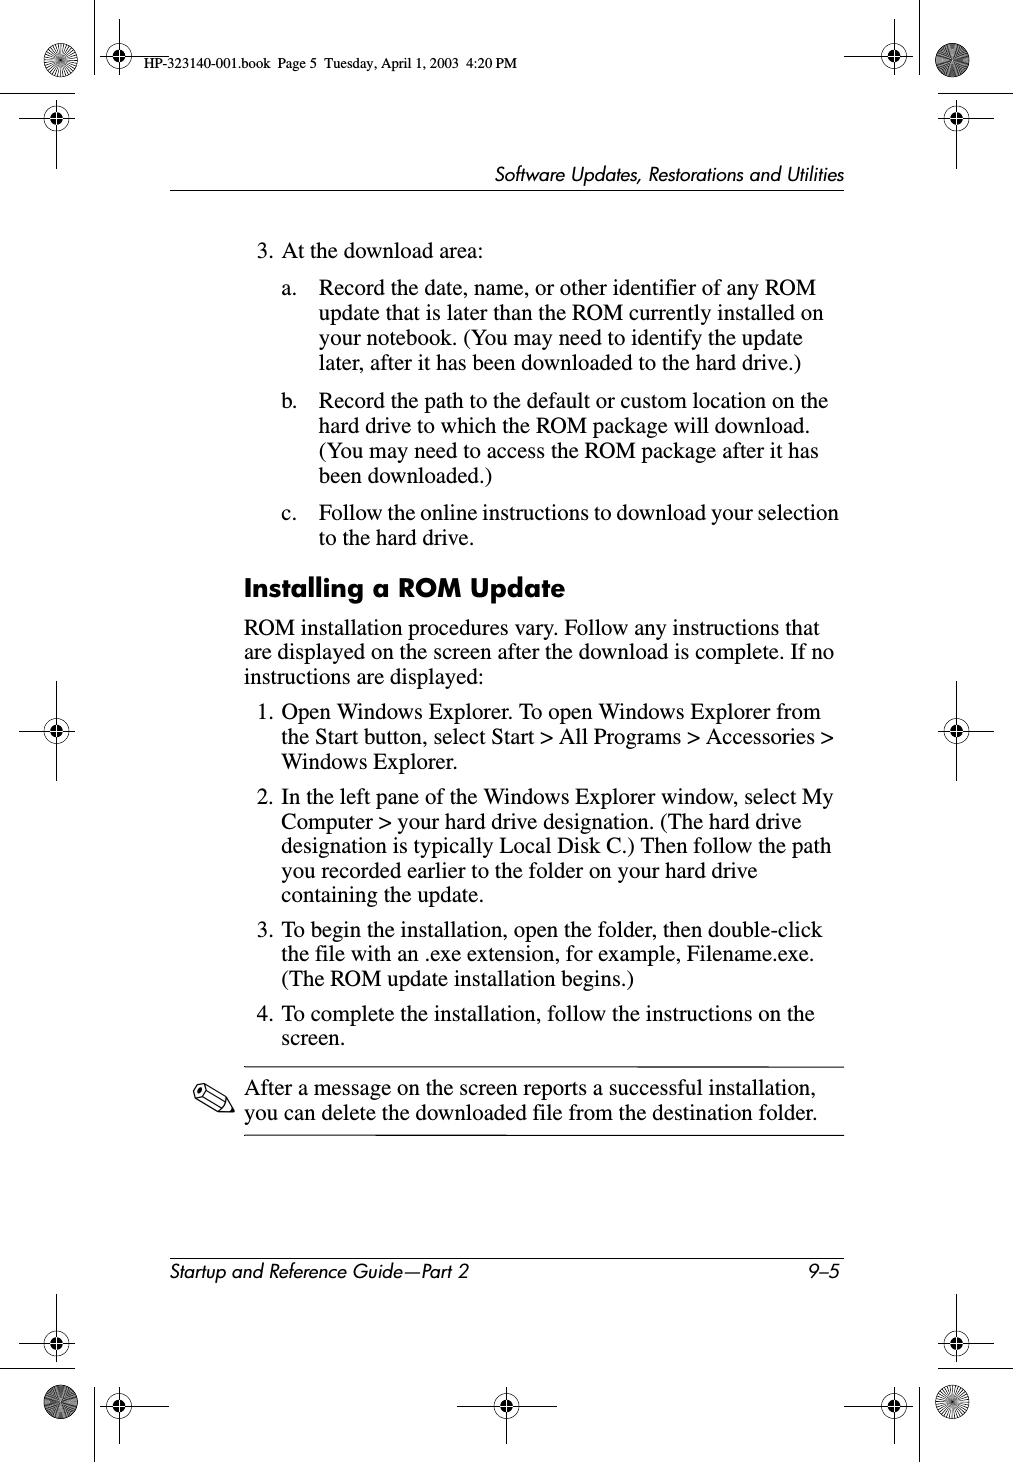 Software Updates, Restorations and UtilitiesStartup and Reference Guide—Part 2 9–53. At the download area:a. Record the date, name, or other identifier of any ROM update that is later than the ROM currently installed on your notebook. (You may need to identify the update later, after it has been downloaded to the hard drive.)b. Record the path to the default or custom location on the hard drive to which the ROM package will download. (You may need to access the ROM package after it has been downloaded.)c. Follow the online instructions to download your selection to the hard drive.Installing a ROM UpdateROM installation procedures vary. Follow any instructions that are displayed on the screen after the download is complete. If no instructions are displayed:1. Open Windows Explorer. To open Windows Explorer from the Start button, select Start &gt; All Programs &gt; Accessories &gt; Windows Explorer.2. In the left pane of the Windows Explorer window, select My Computer &gt; your hard drive designation. (The hard drive designation is typically Local Disk C.) Then follow the path you recorded earlier to the folder on your hard drive containing the update.3. To begin the installation, open the folder, then double-click the file with an .exe extension, for example, Filename.exe. (The ROM update installation begins.)4. To complete the installation, follow the instructions on the screen.✎After a message on the screen reports a successful installation, you can delete the downloaded file from the destination folder.HP-323140-001.book  Page 5  Tuesday, April 1, 2003  4:20 PM